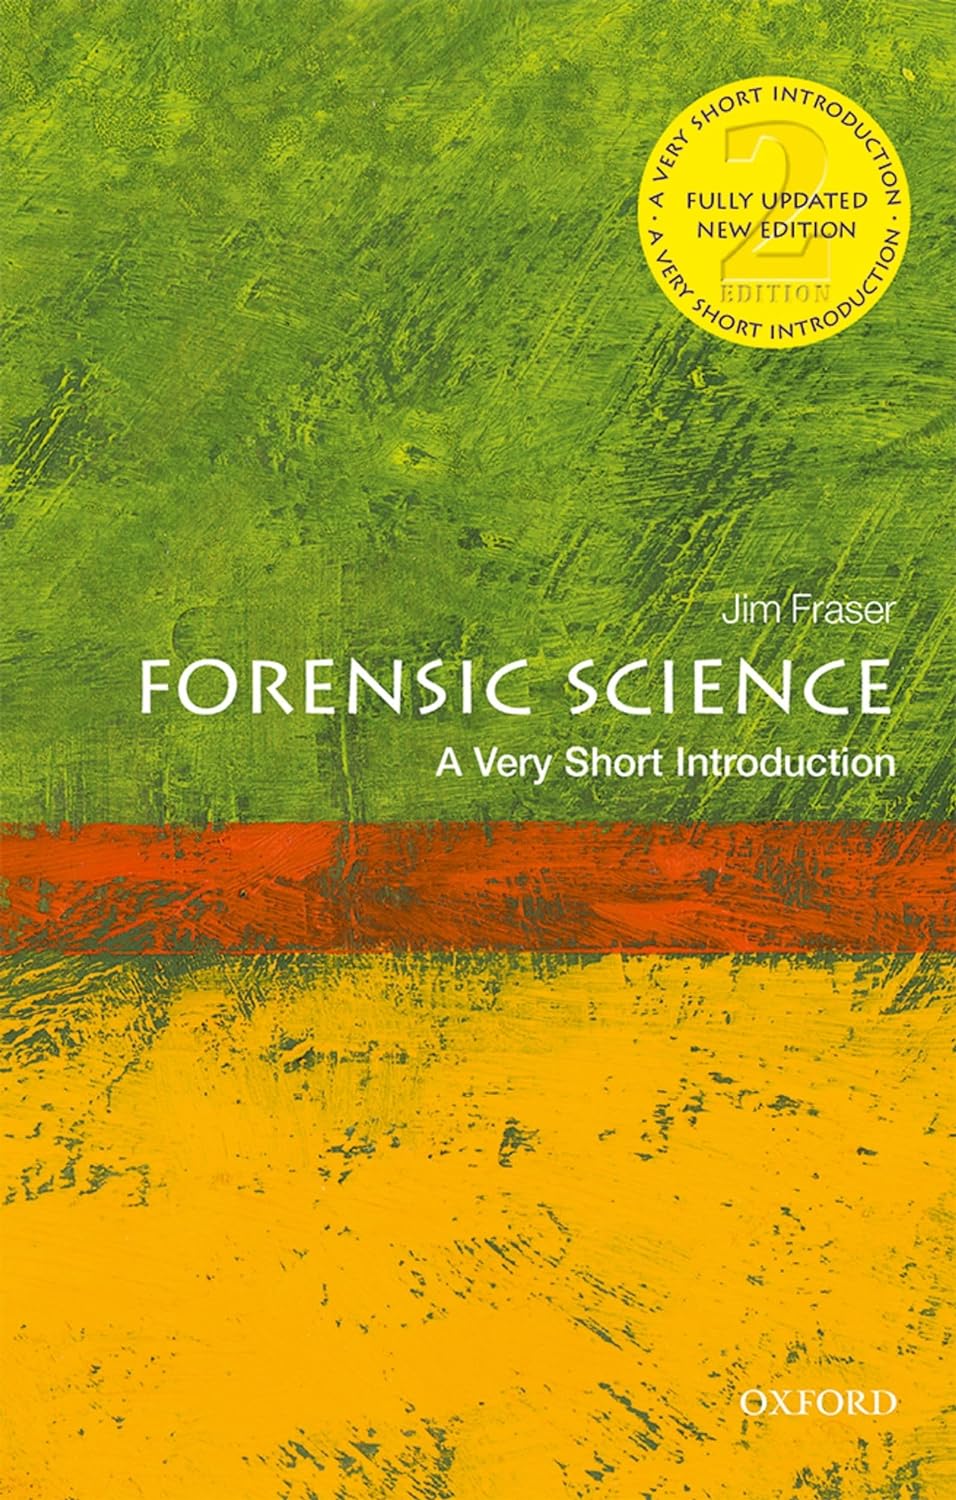 Limited-Time Promo: Forensic Science: A Very Short Introduction - Only £7.00!